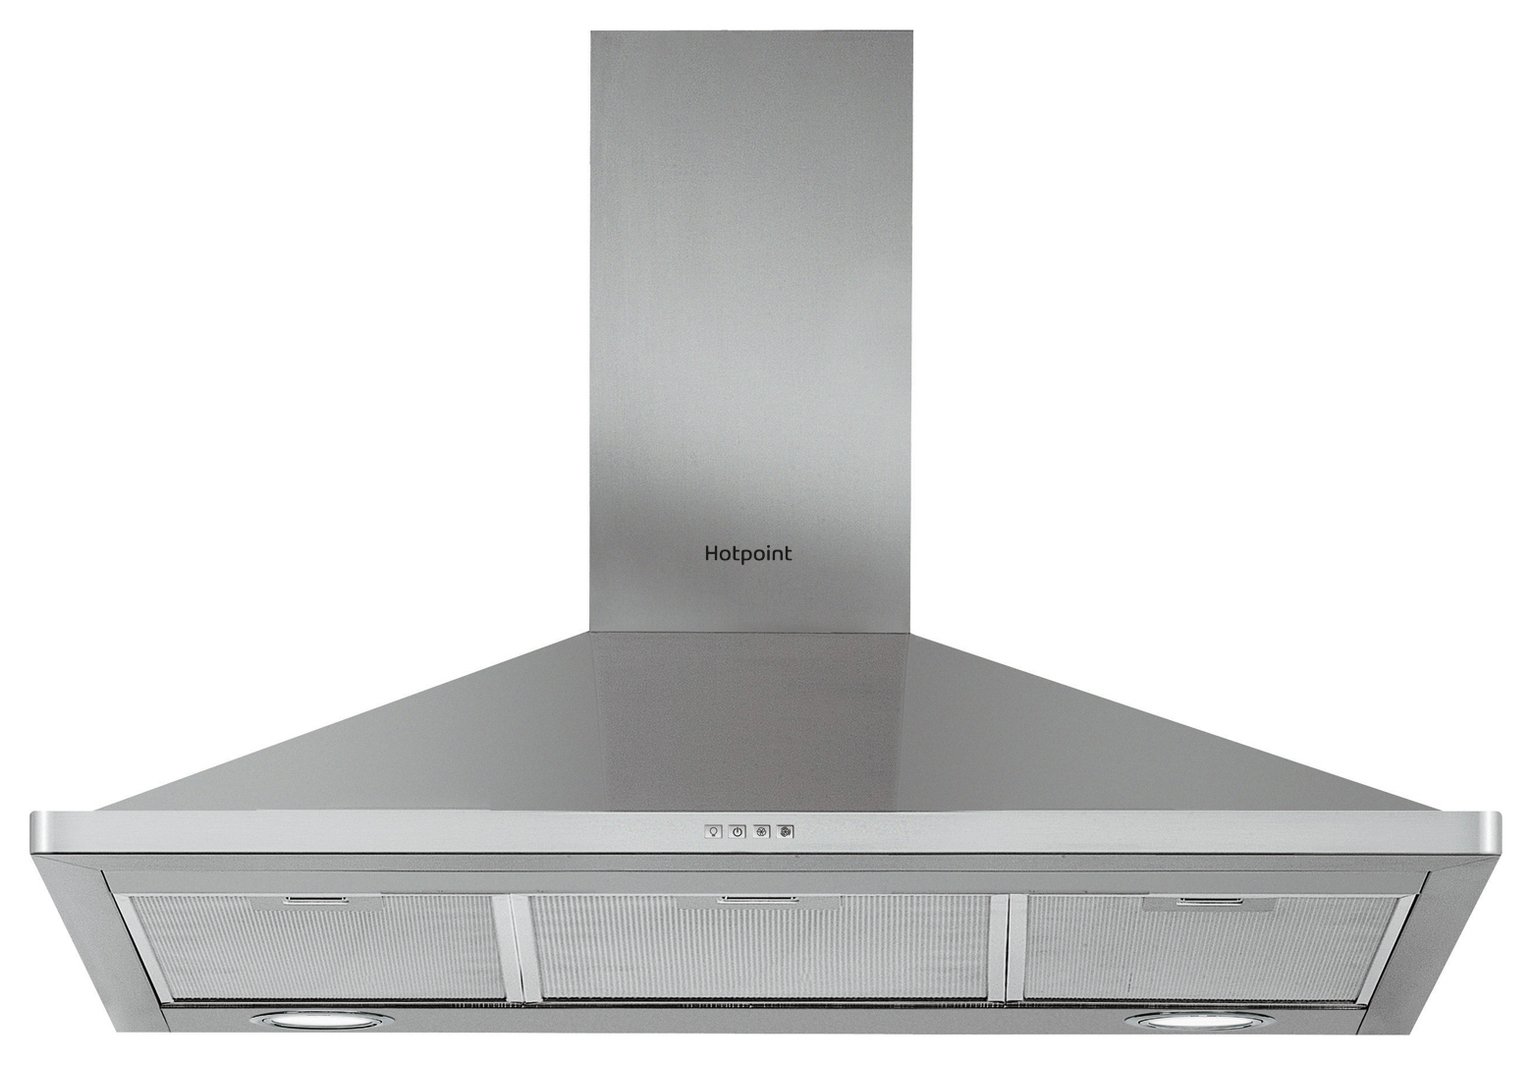 Hotpoint PHPN94FAMX 90cm Cooker Hood - Stainless Steel